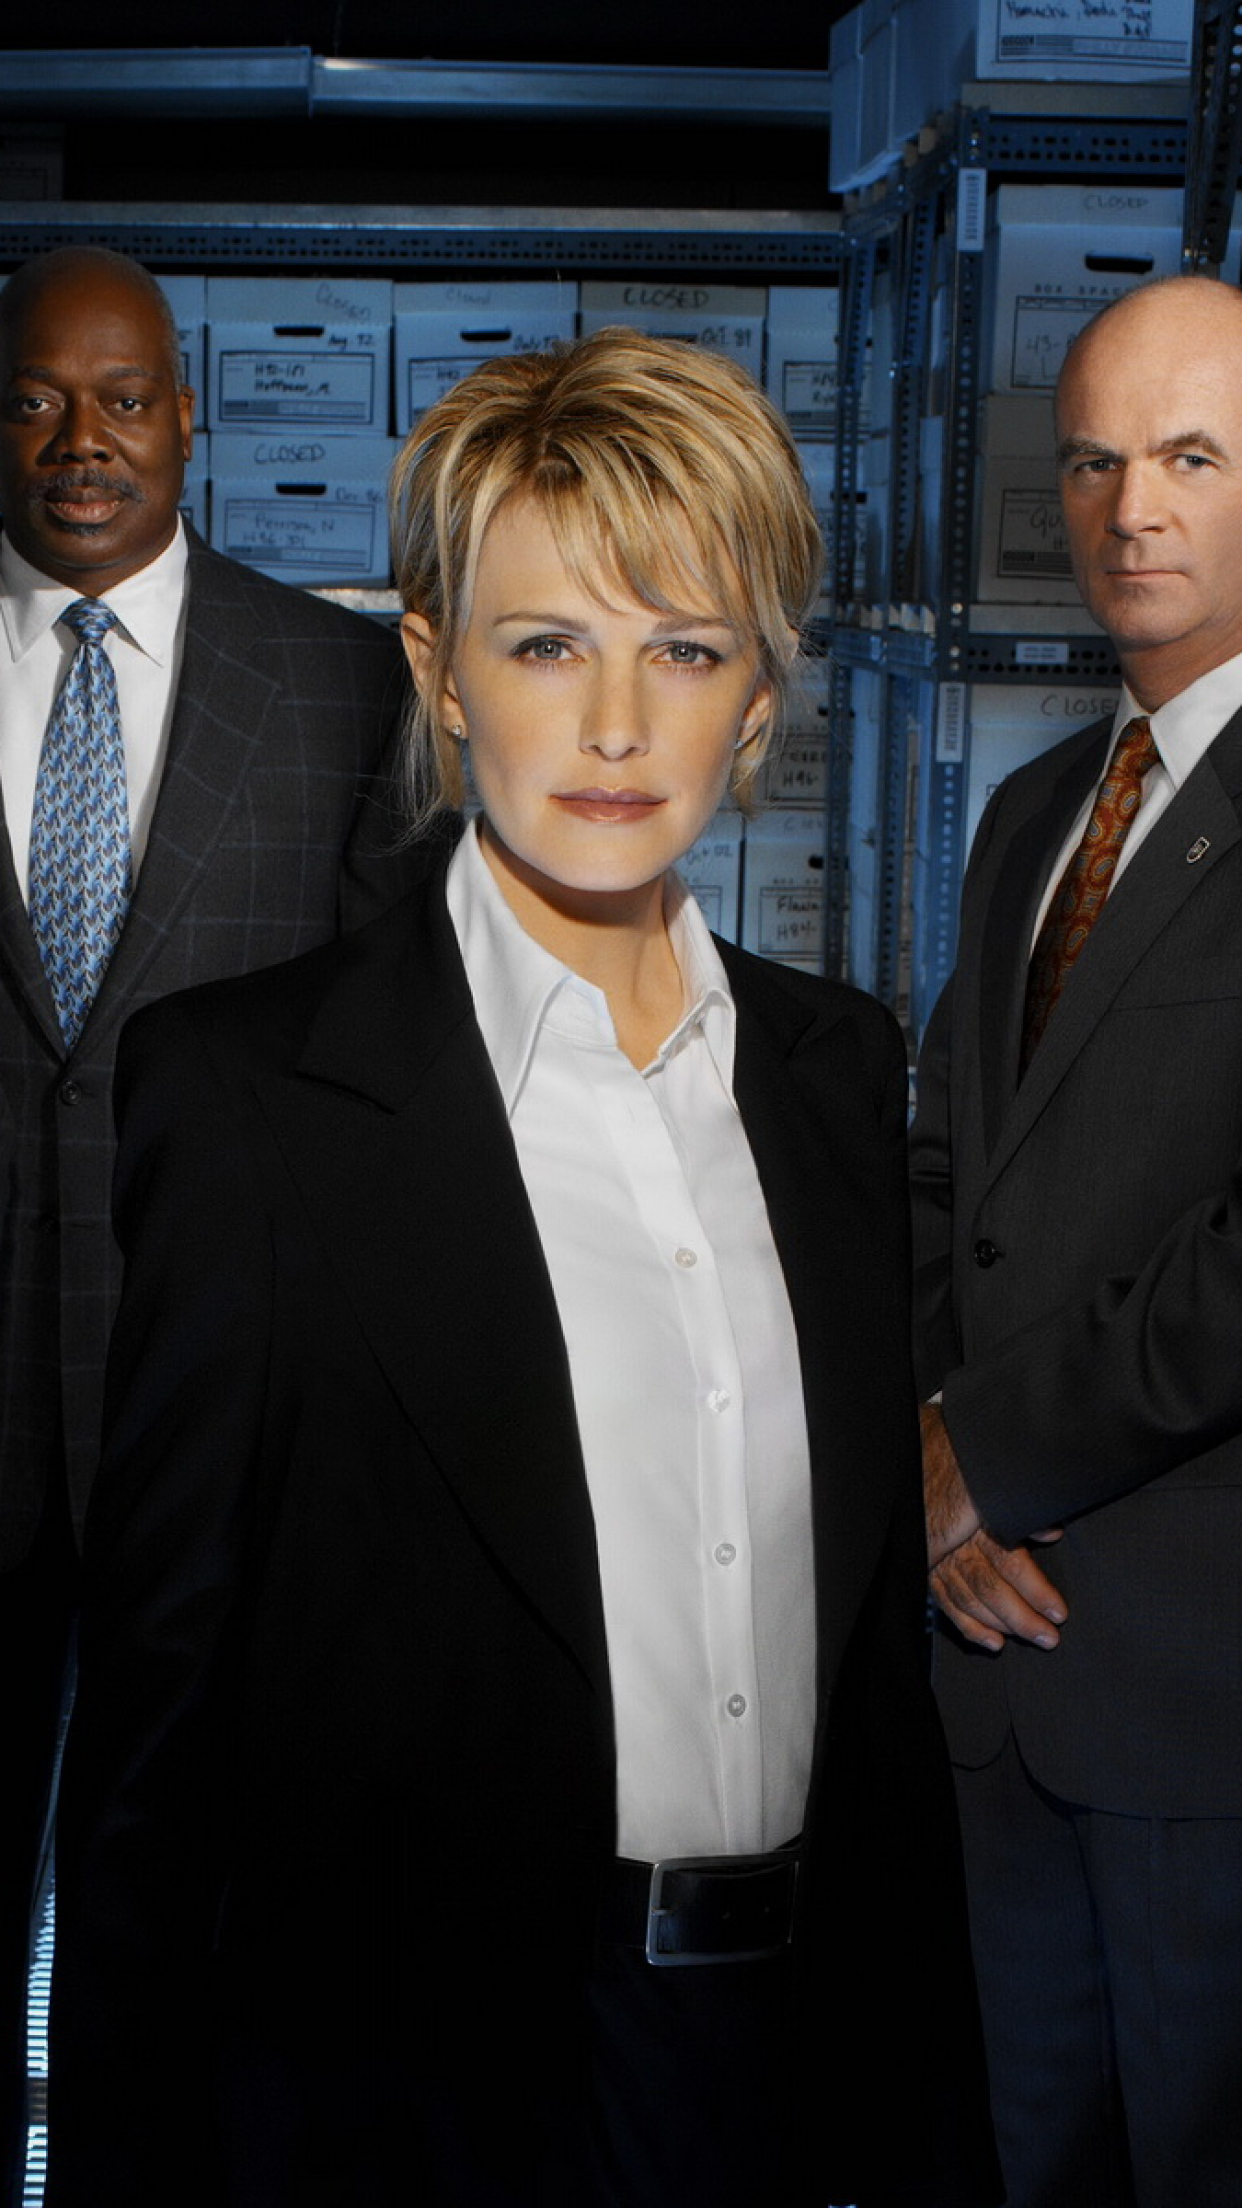 ScreenBeauty. cold case, lilly rush, kathryn morris